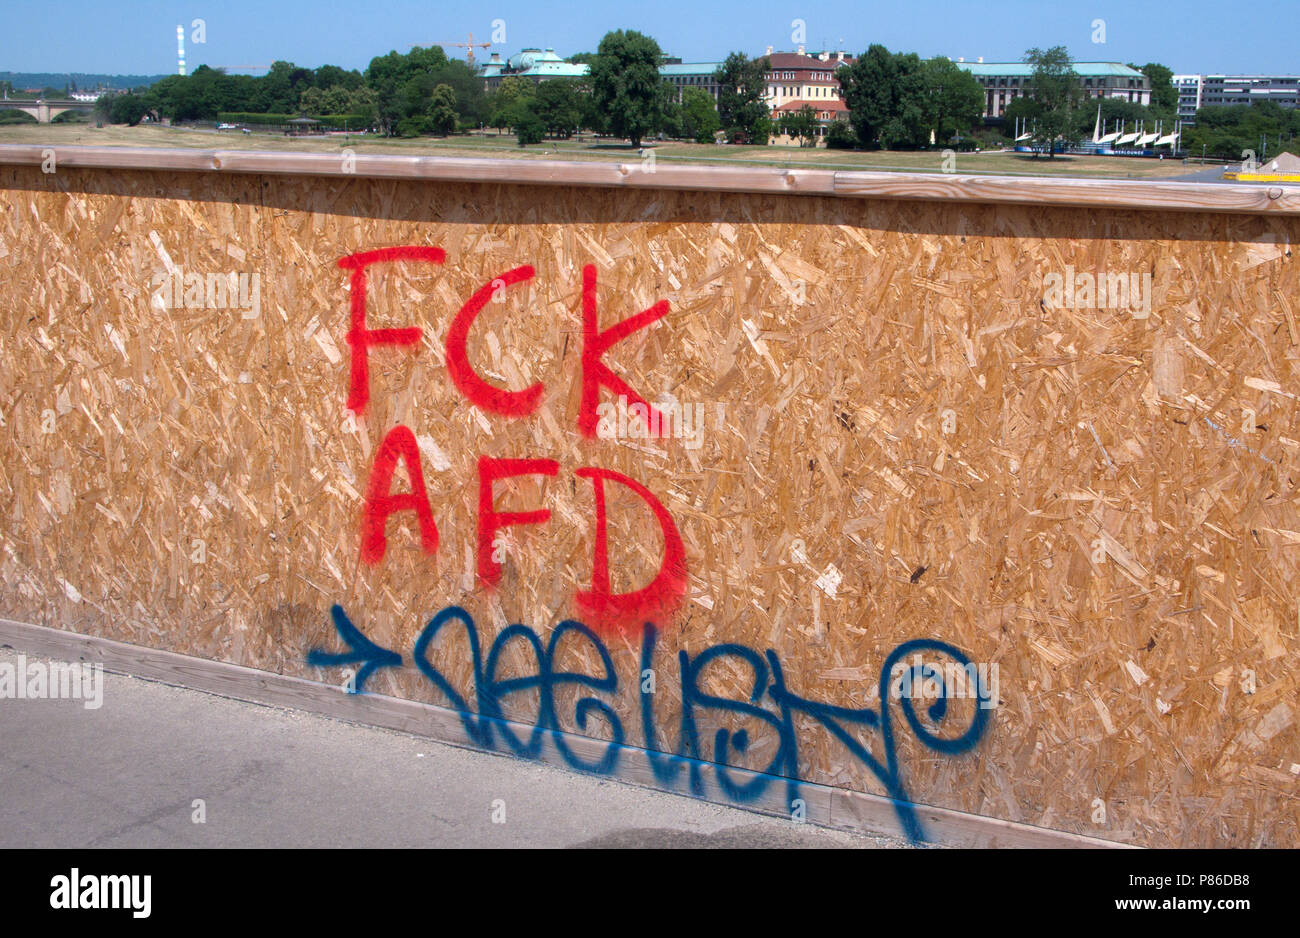 Protest Graffiti against the right wing german political party, Alternativ für Deutschland, (AfD), Dresden, Saxony, Germany. Stock Photo